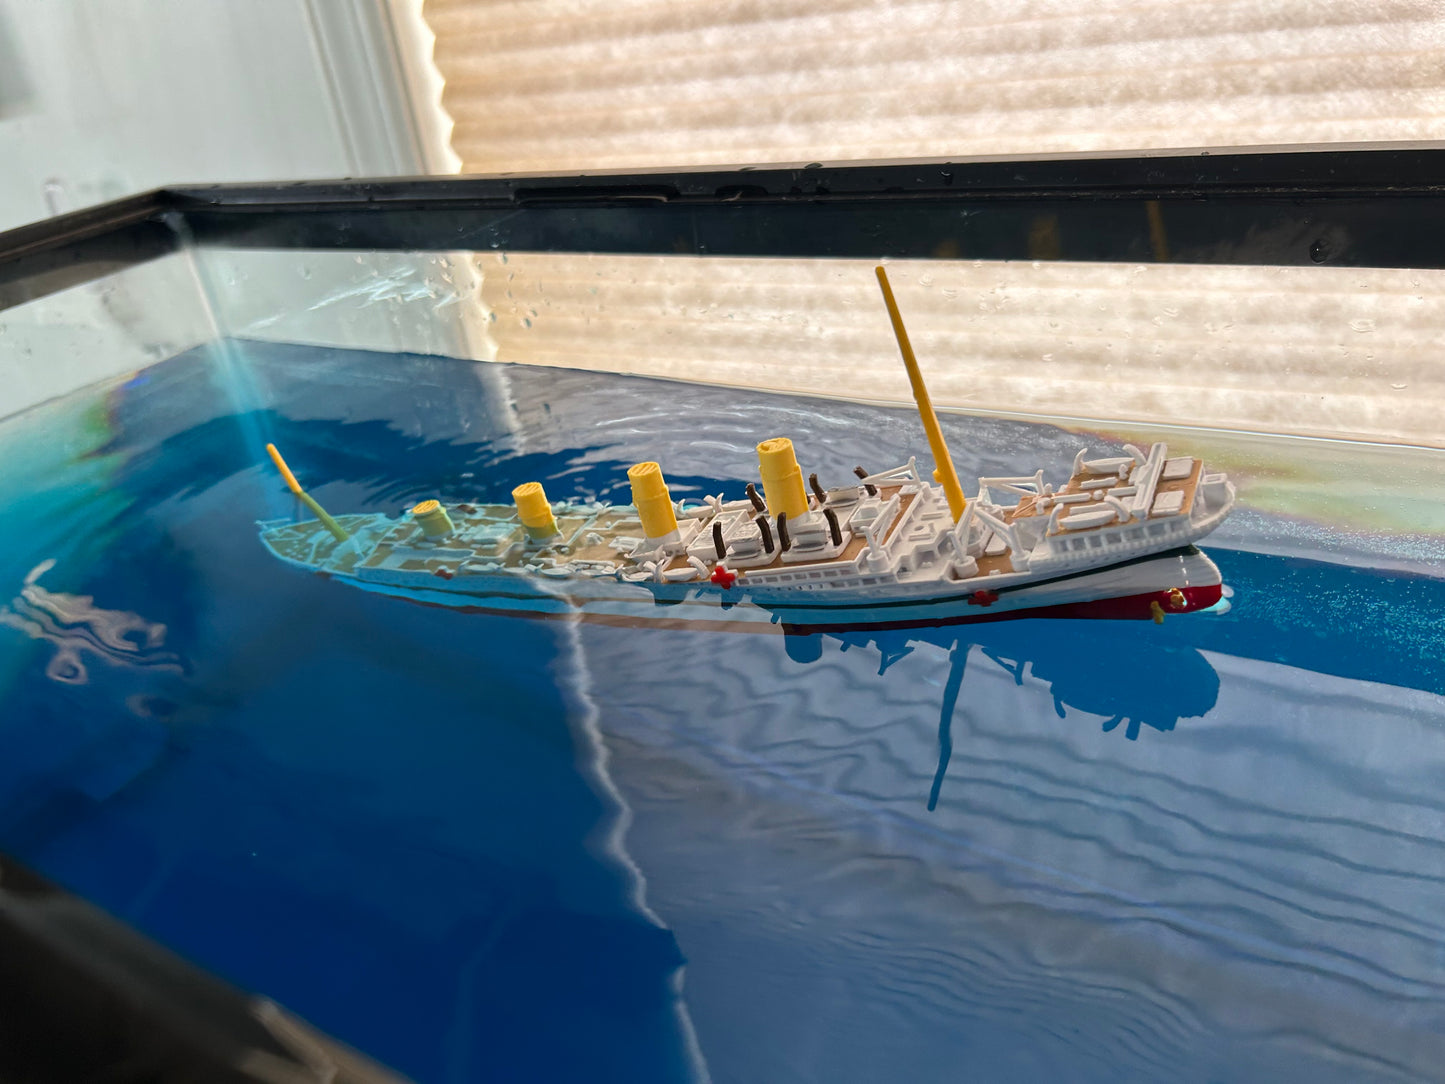 HMHS Britannic Submersible Model, Educational Model, FLOATS & SINKS Historically accurate